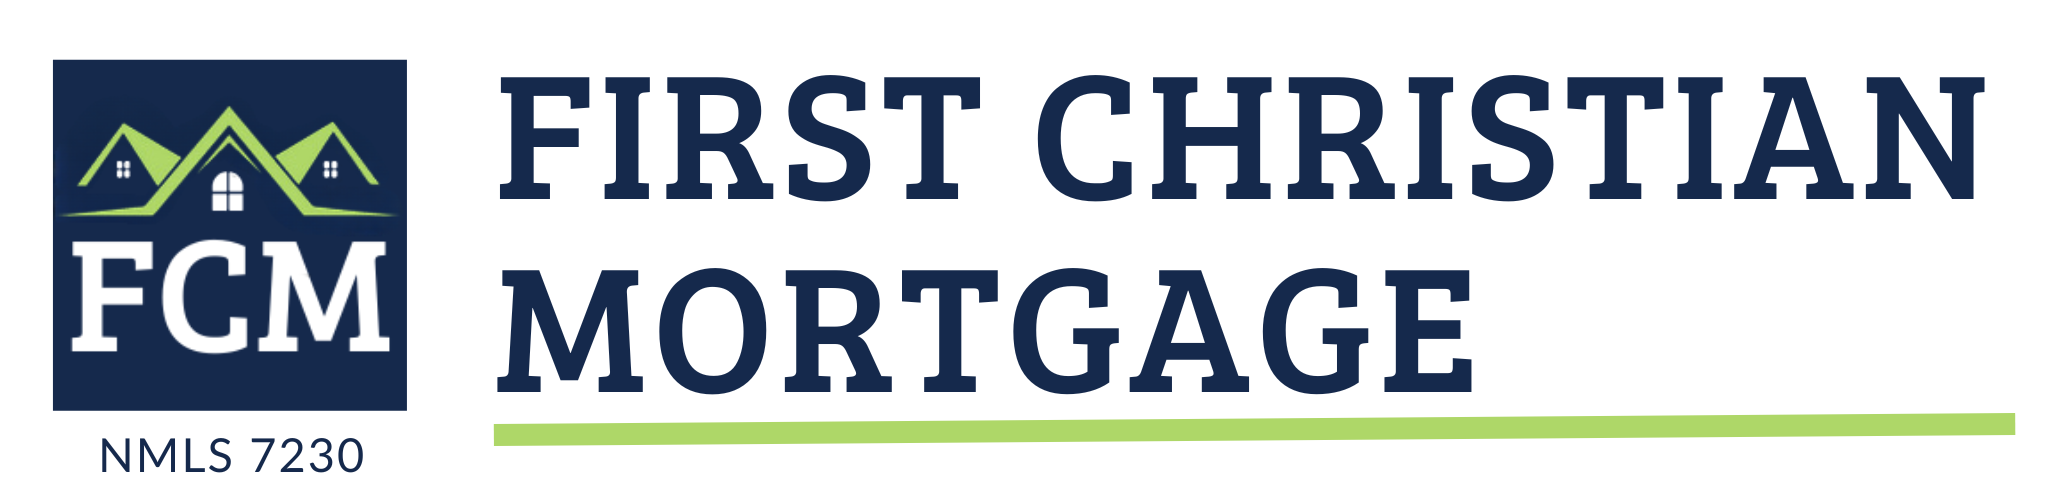 First Christian Mortgage